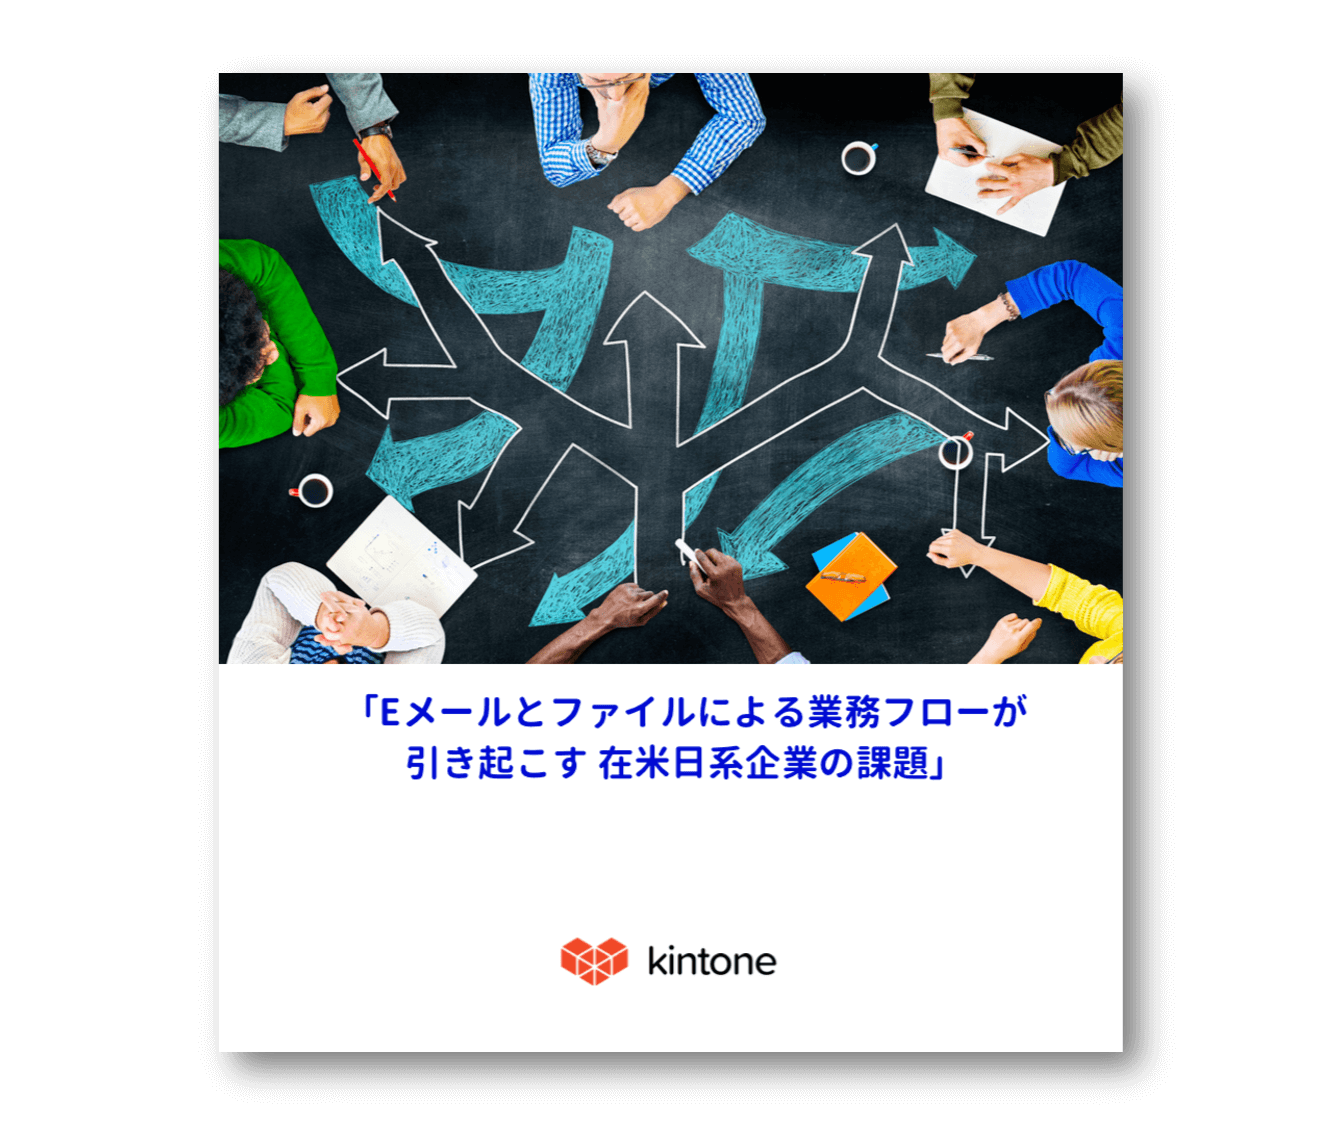 Kintone Japanese Ebook Excel and Paper